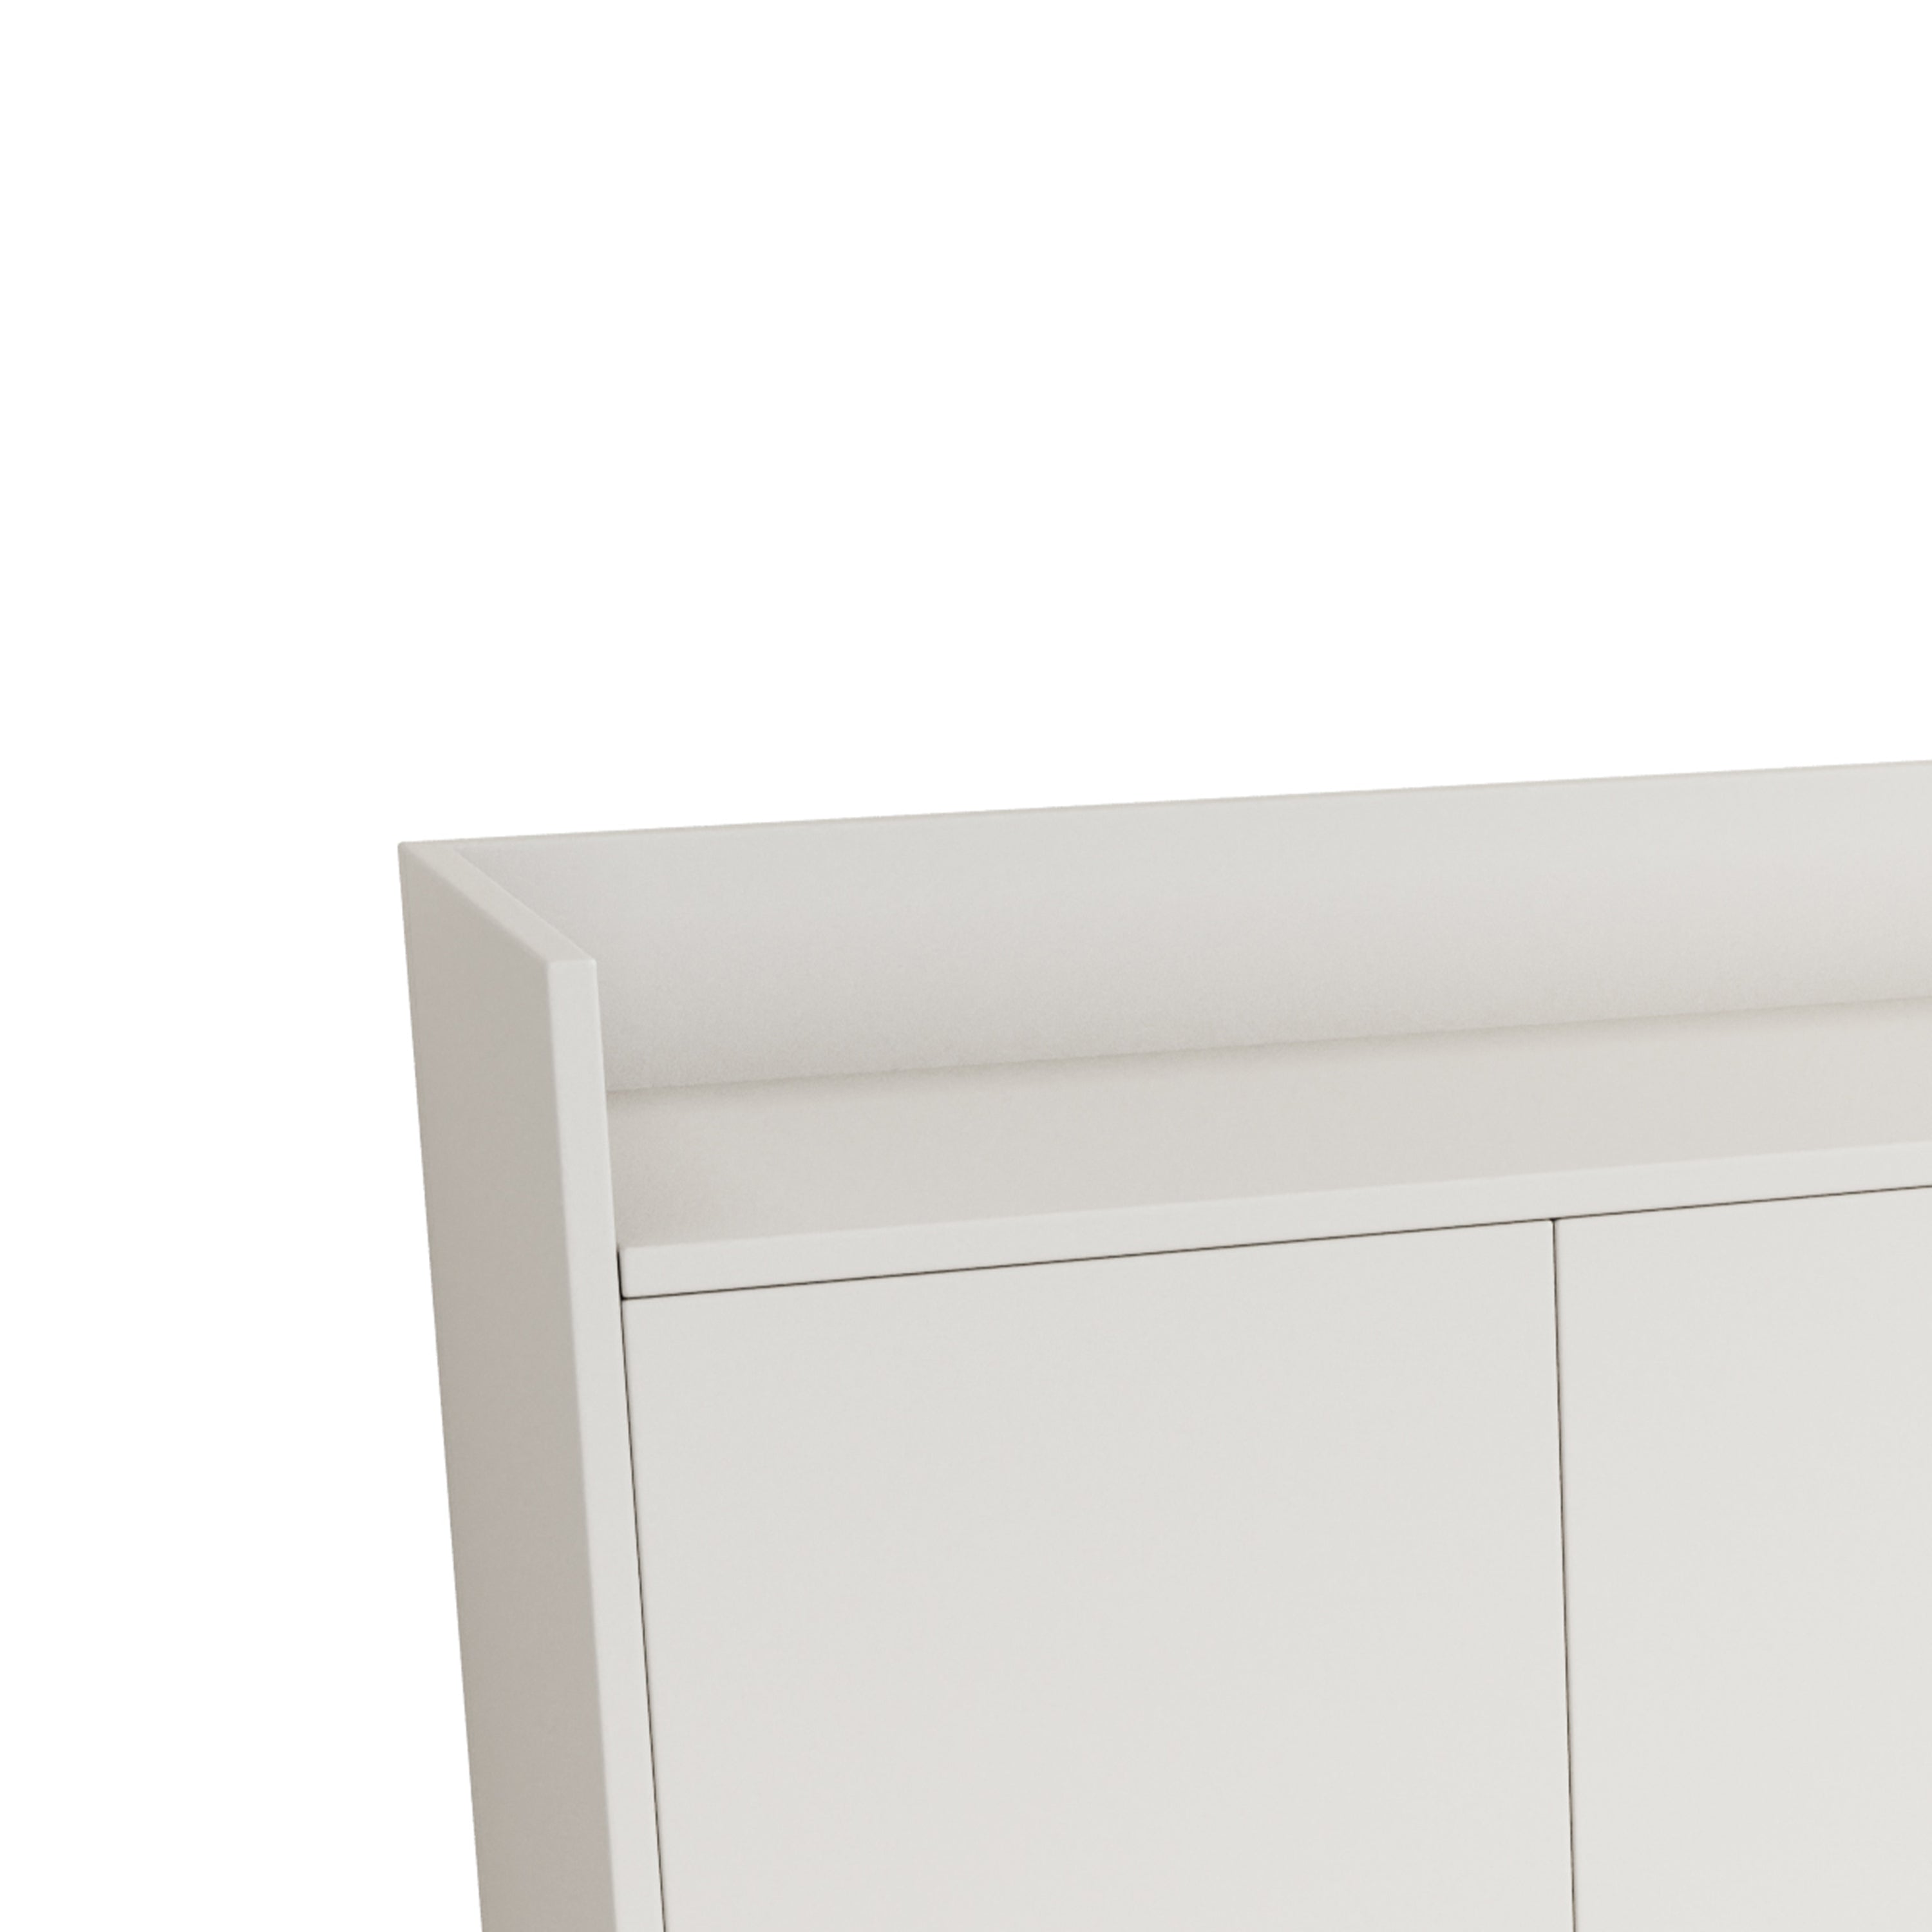 Stylish and Functional 4-Door Storage Cabinet with Square Metal Legs and Particle Board Material - White